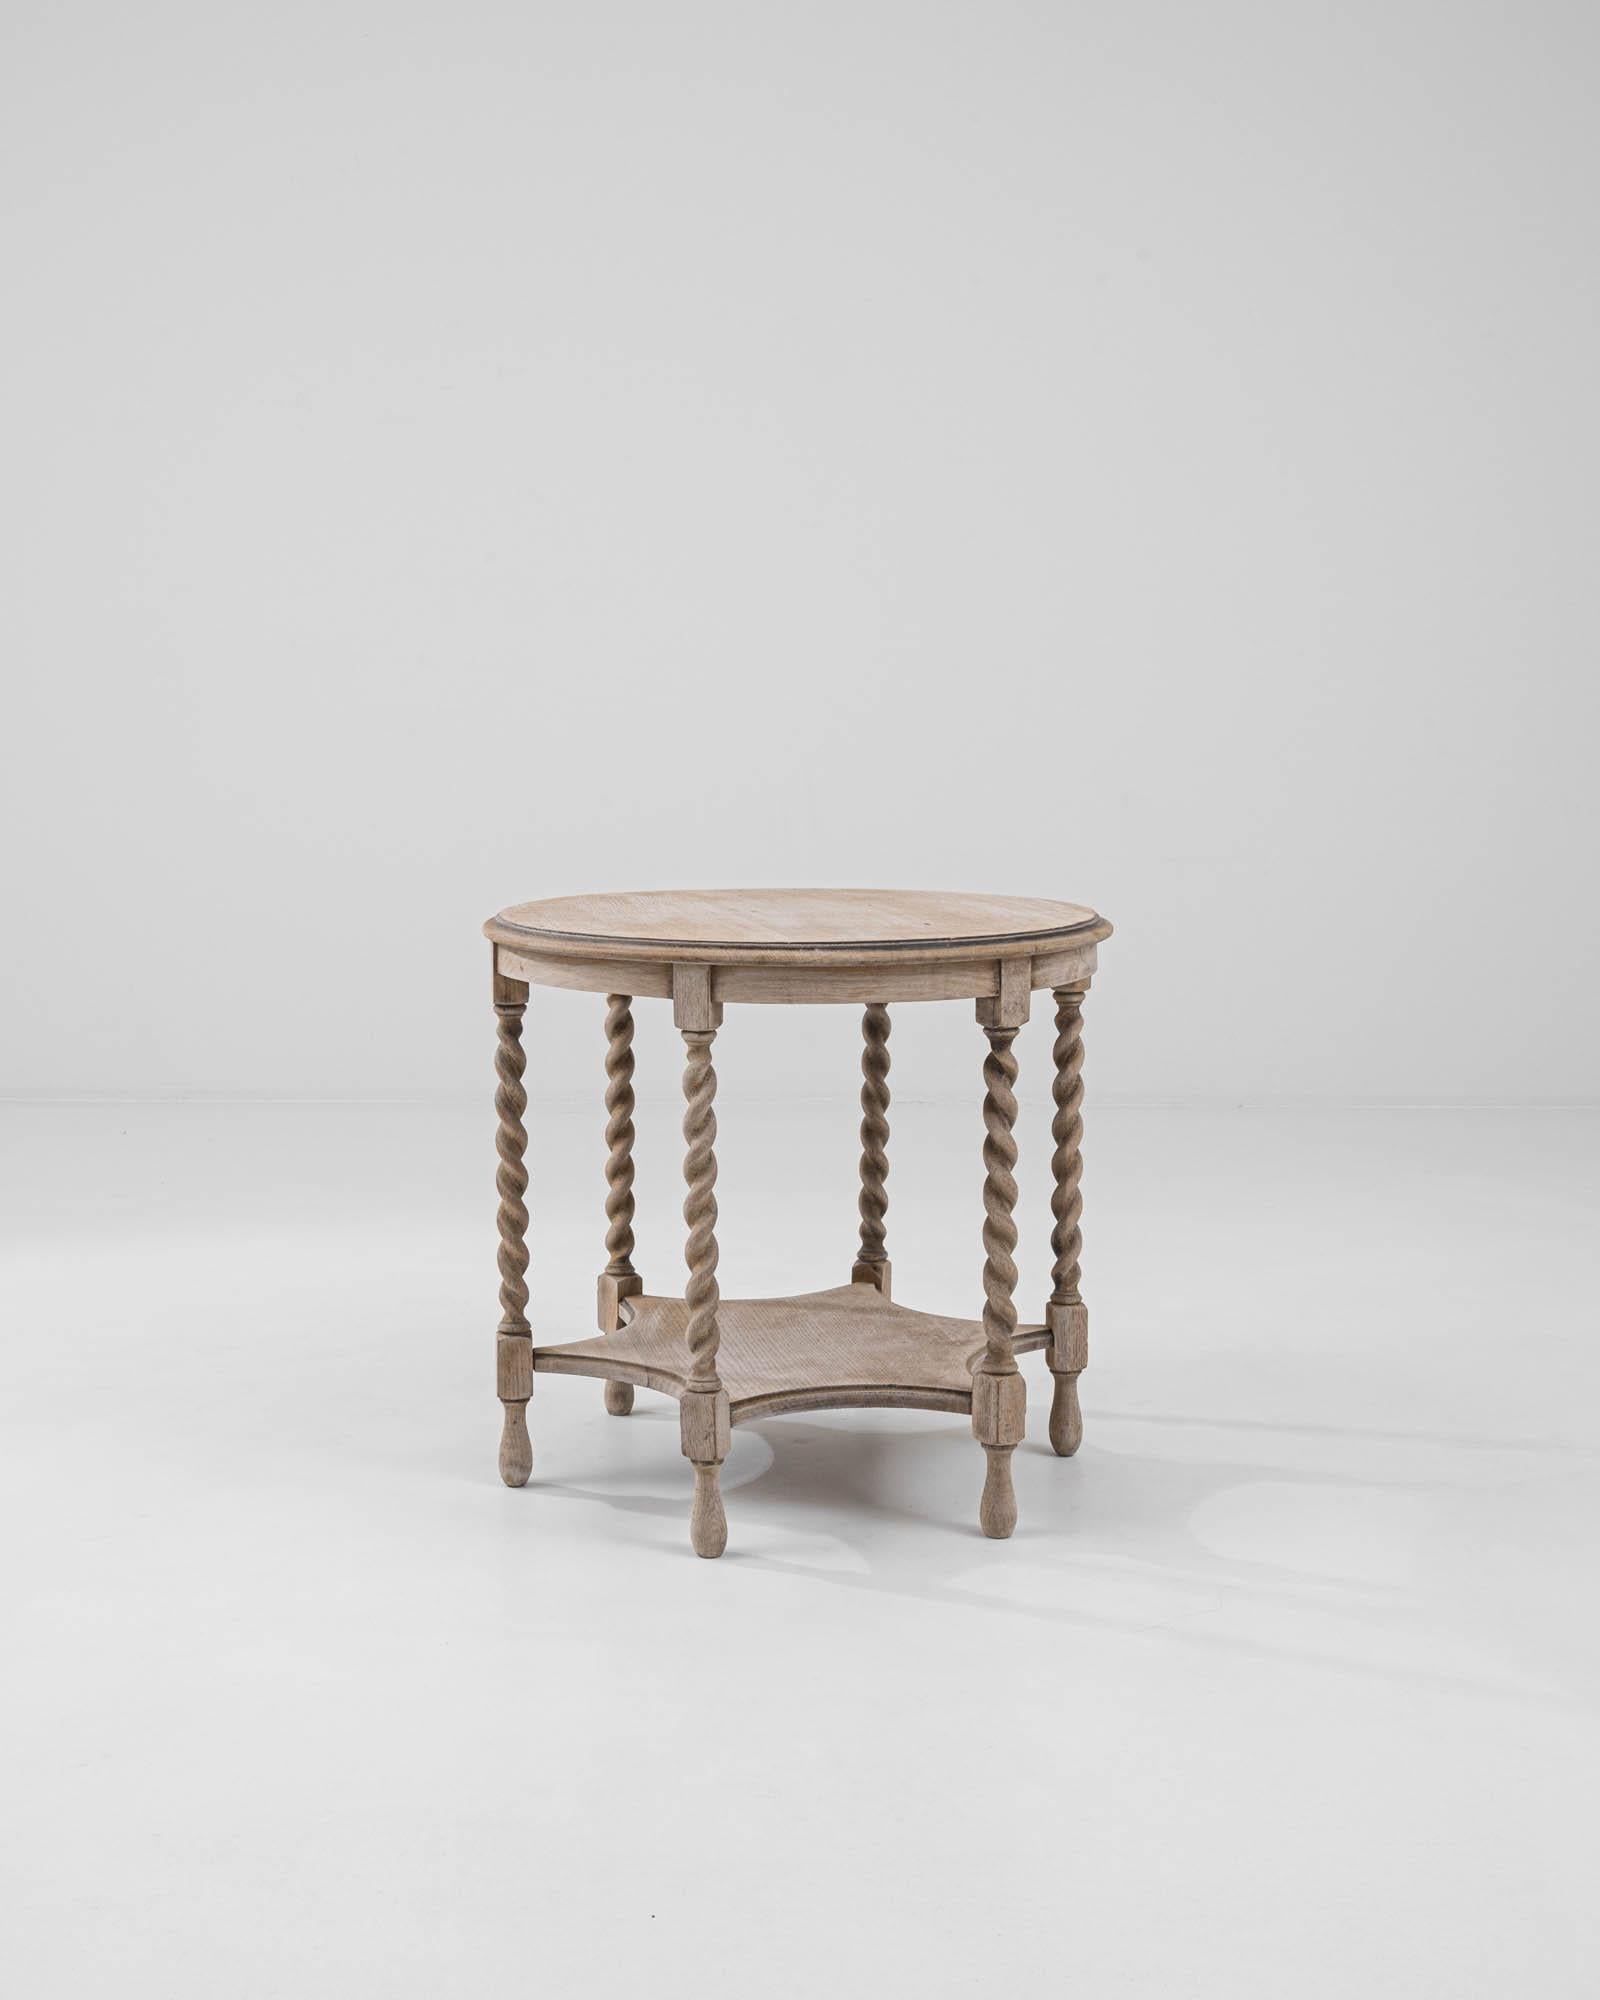 A wooden side table created in 20th century France. With spiraling legs, a star shaped lower shelf, and teardrop feet, this small table is full of surprising details and playful charm. The surface of the oak has been carefully restored through a